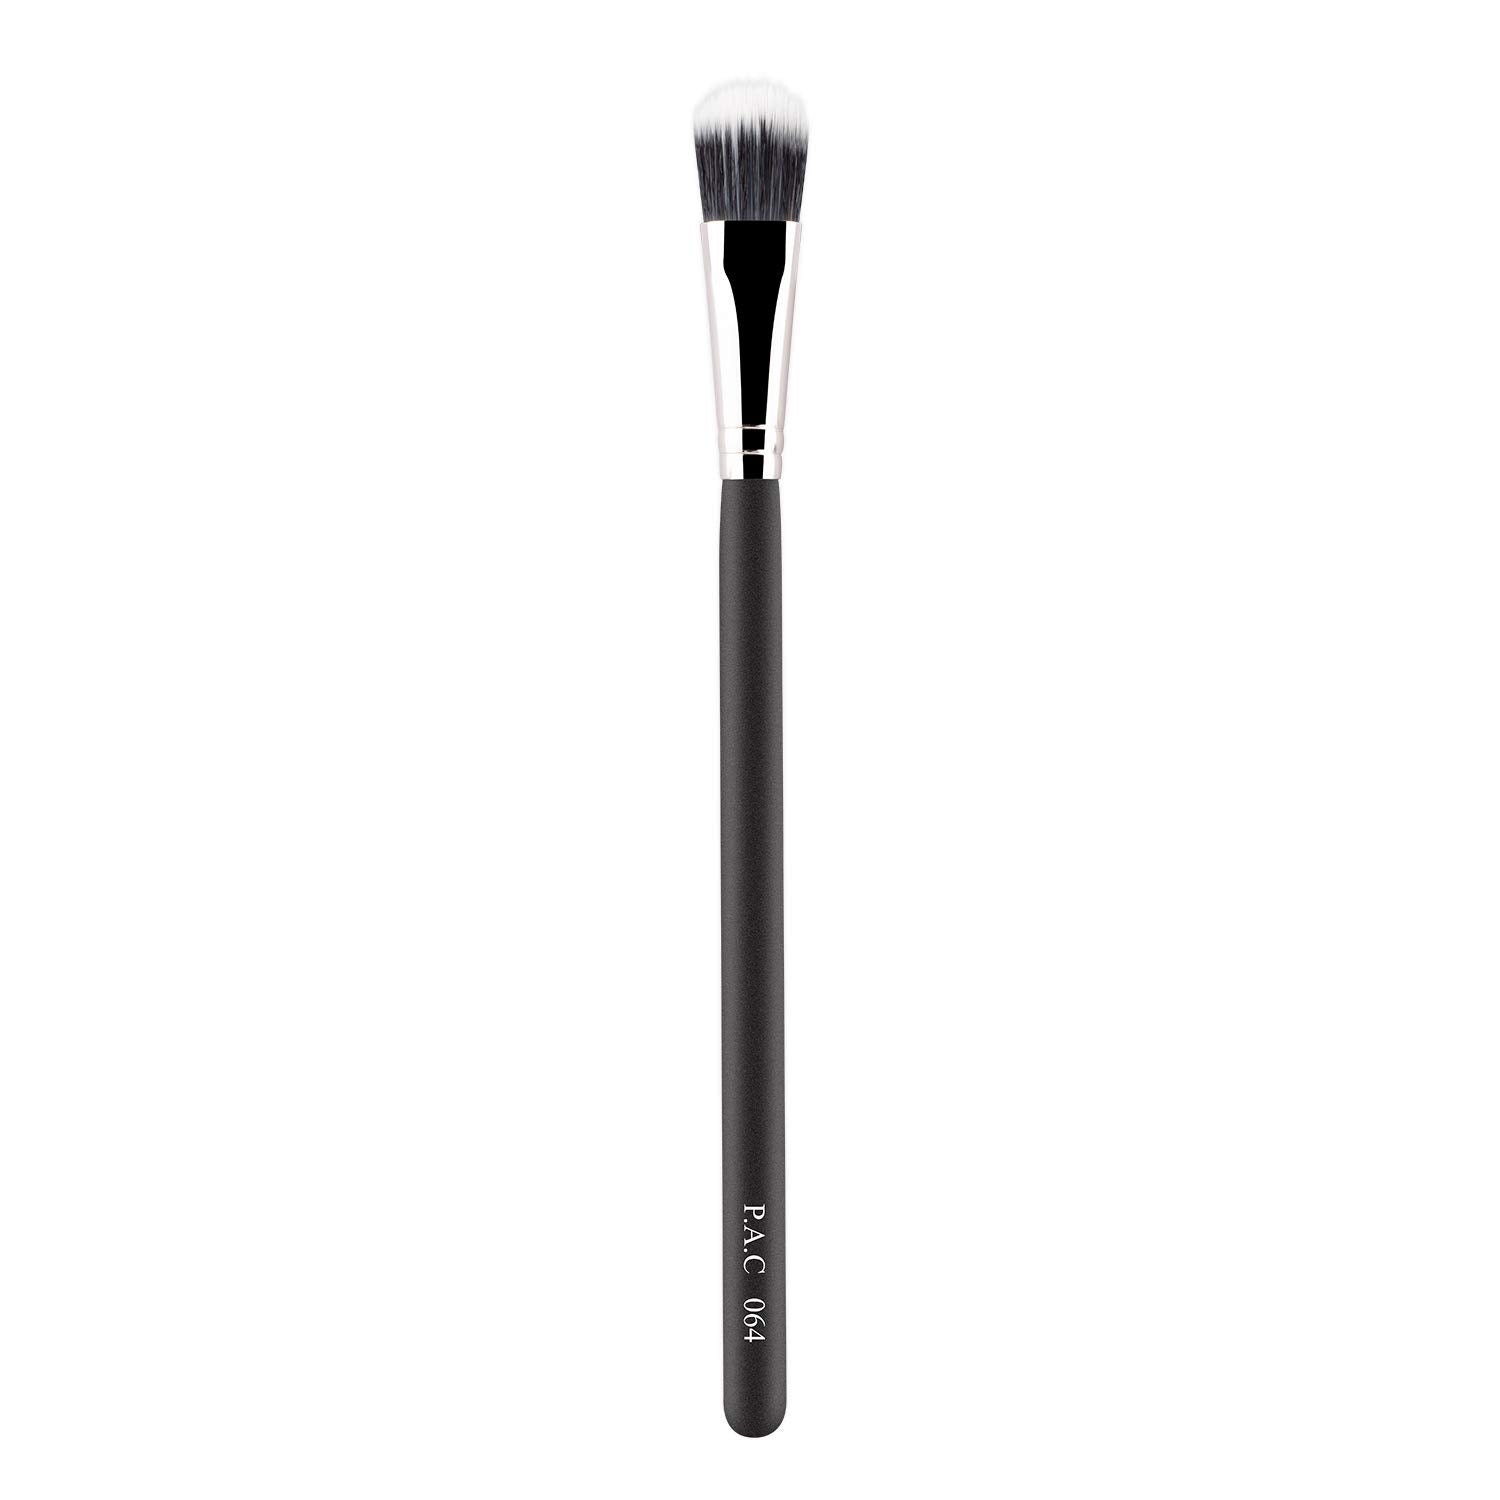 PAC Concealer Brush 064 PAC